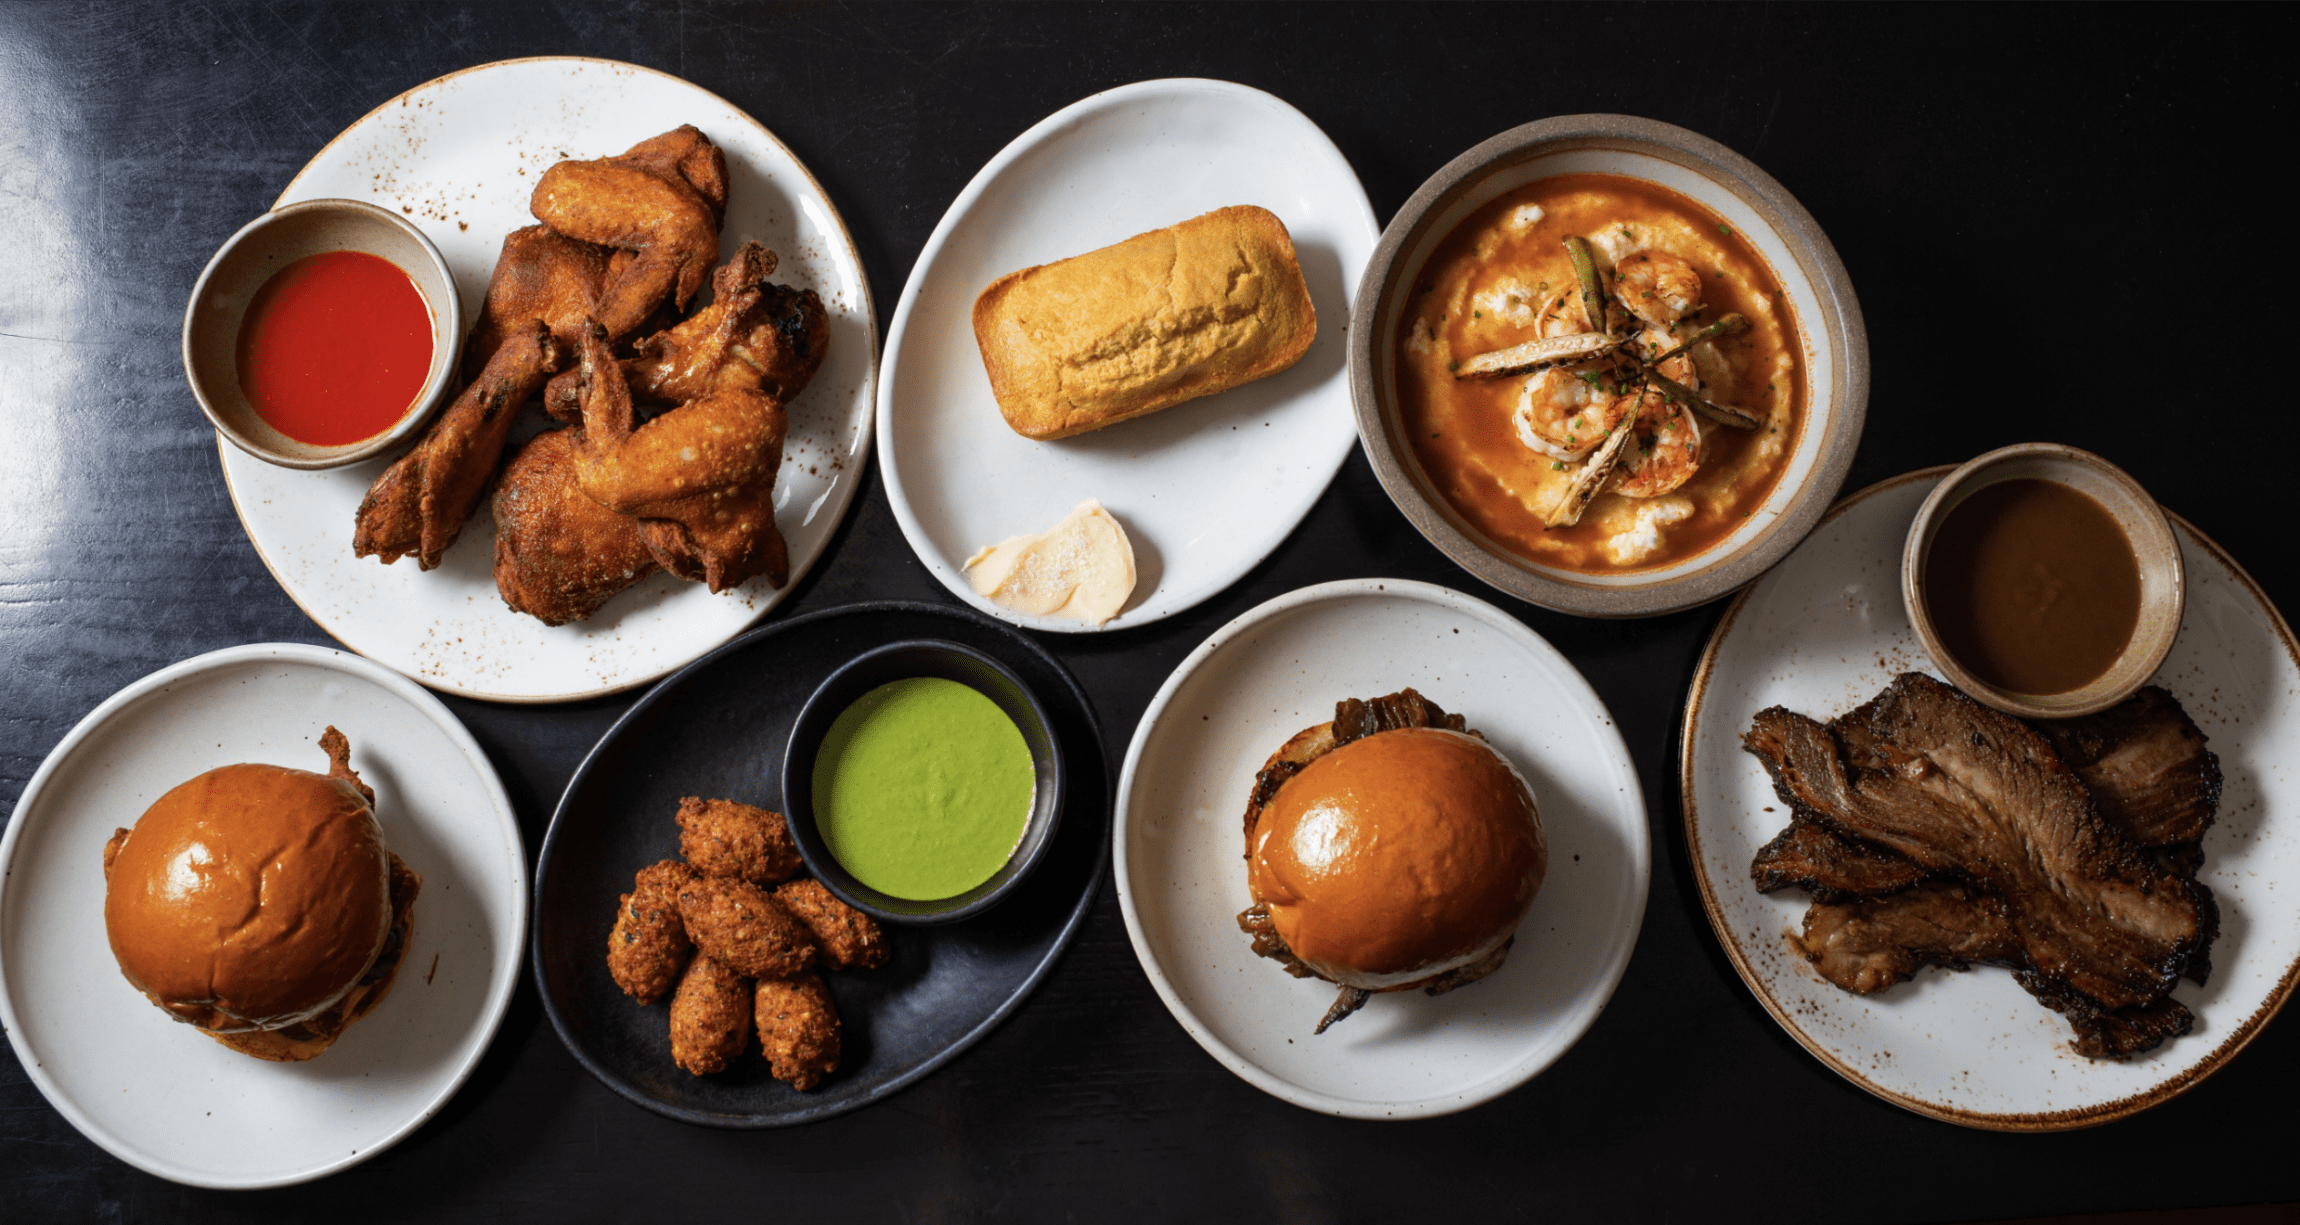 The best restaurants in LA | Various soul food dishes served on a black tabletop at Alta Adams